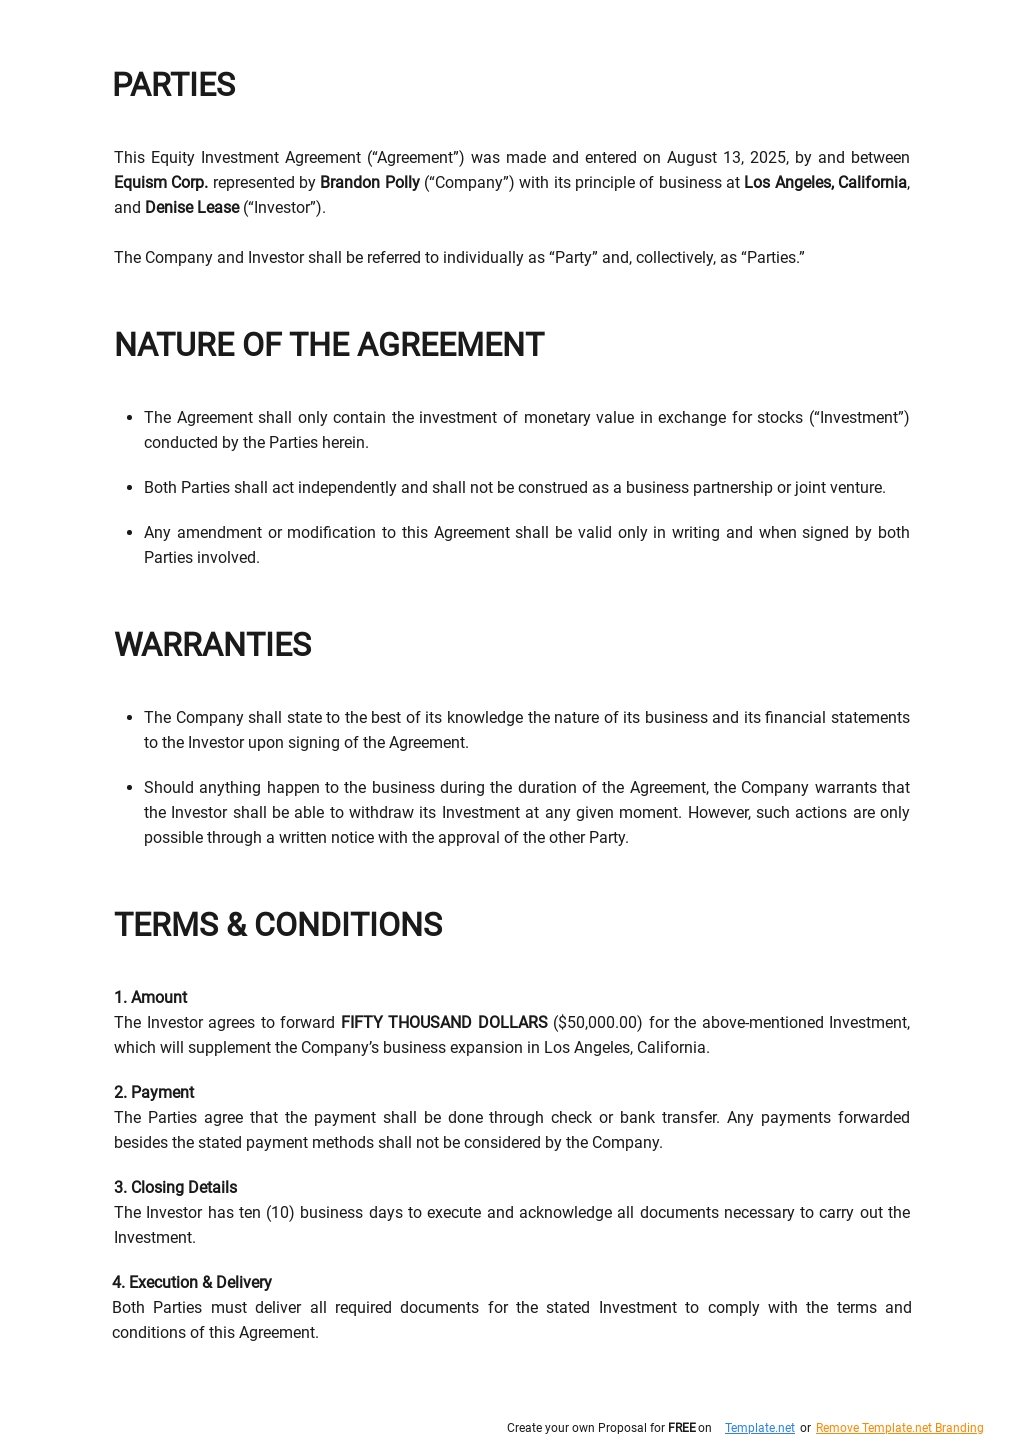 Equity Investment Agreement Template in Google Docs, Word